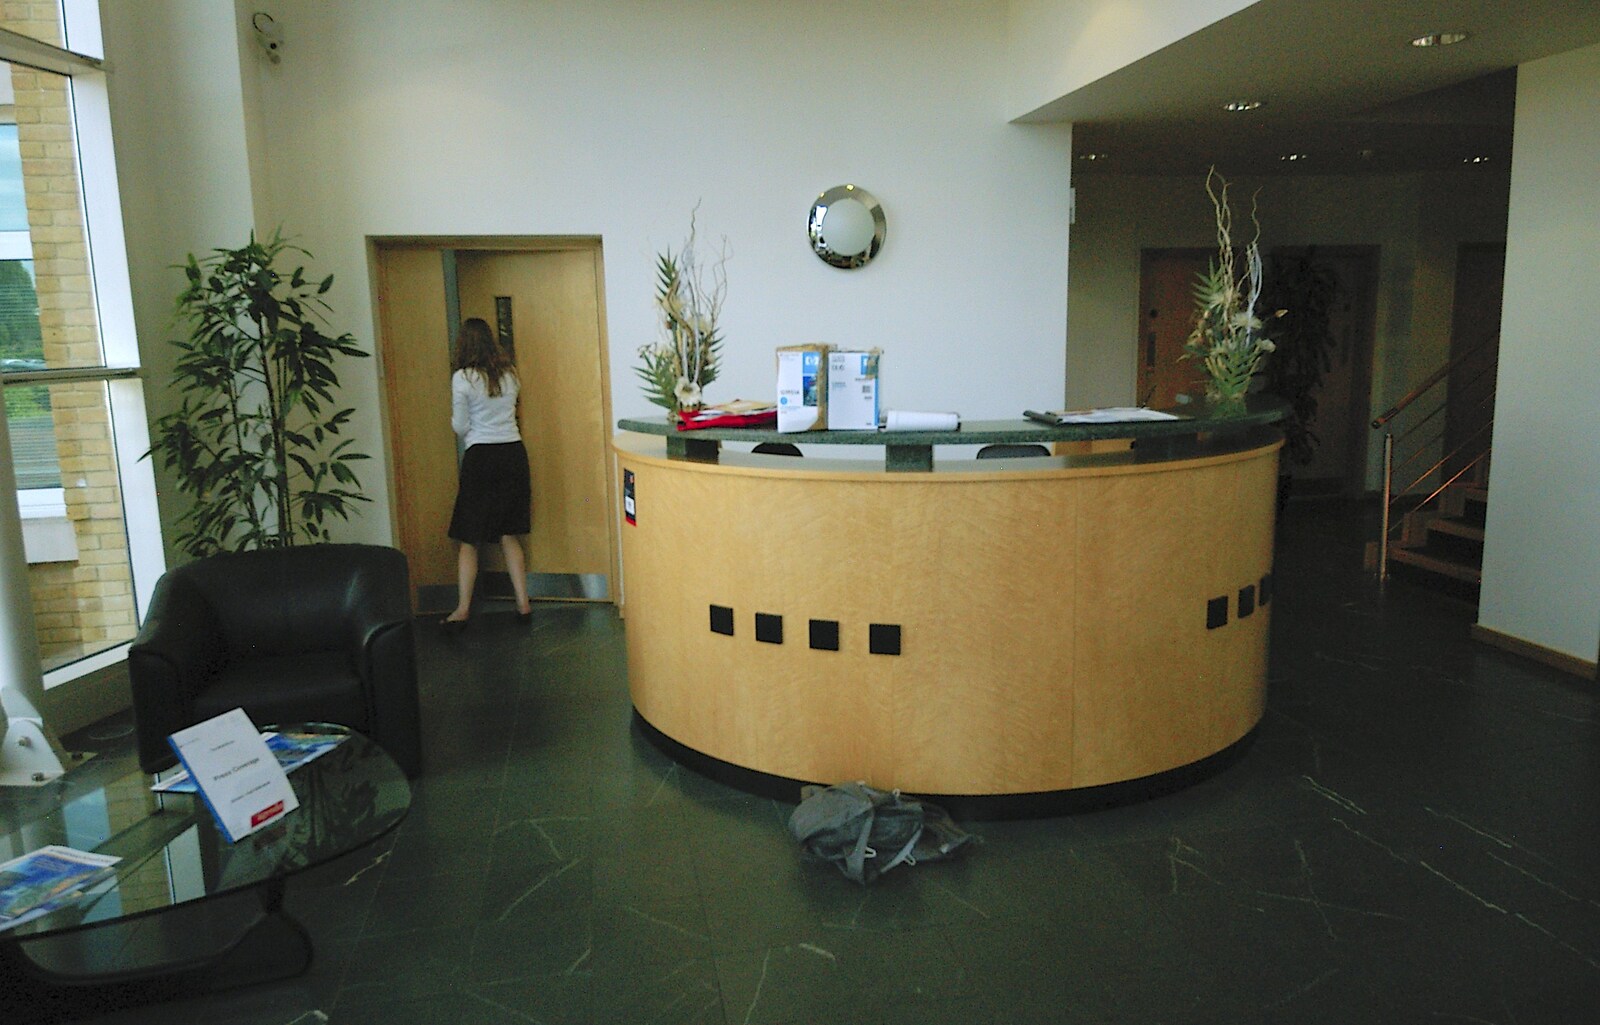 The building's reception front desk from Qualcomm Moves Offices, Milton Road, Cambridge - 26th July 2006